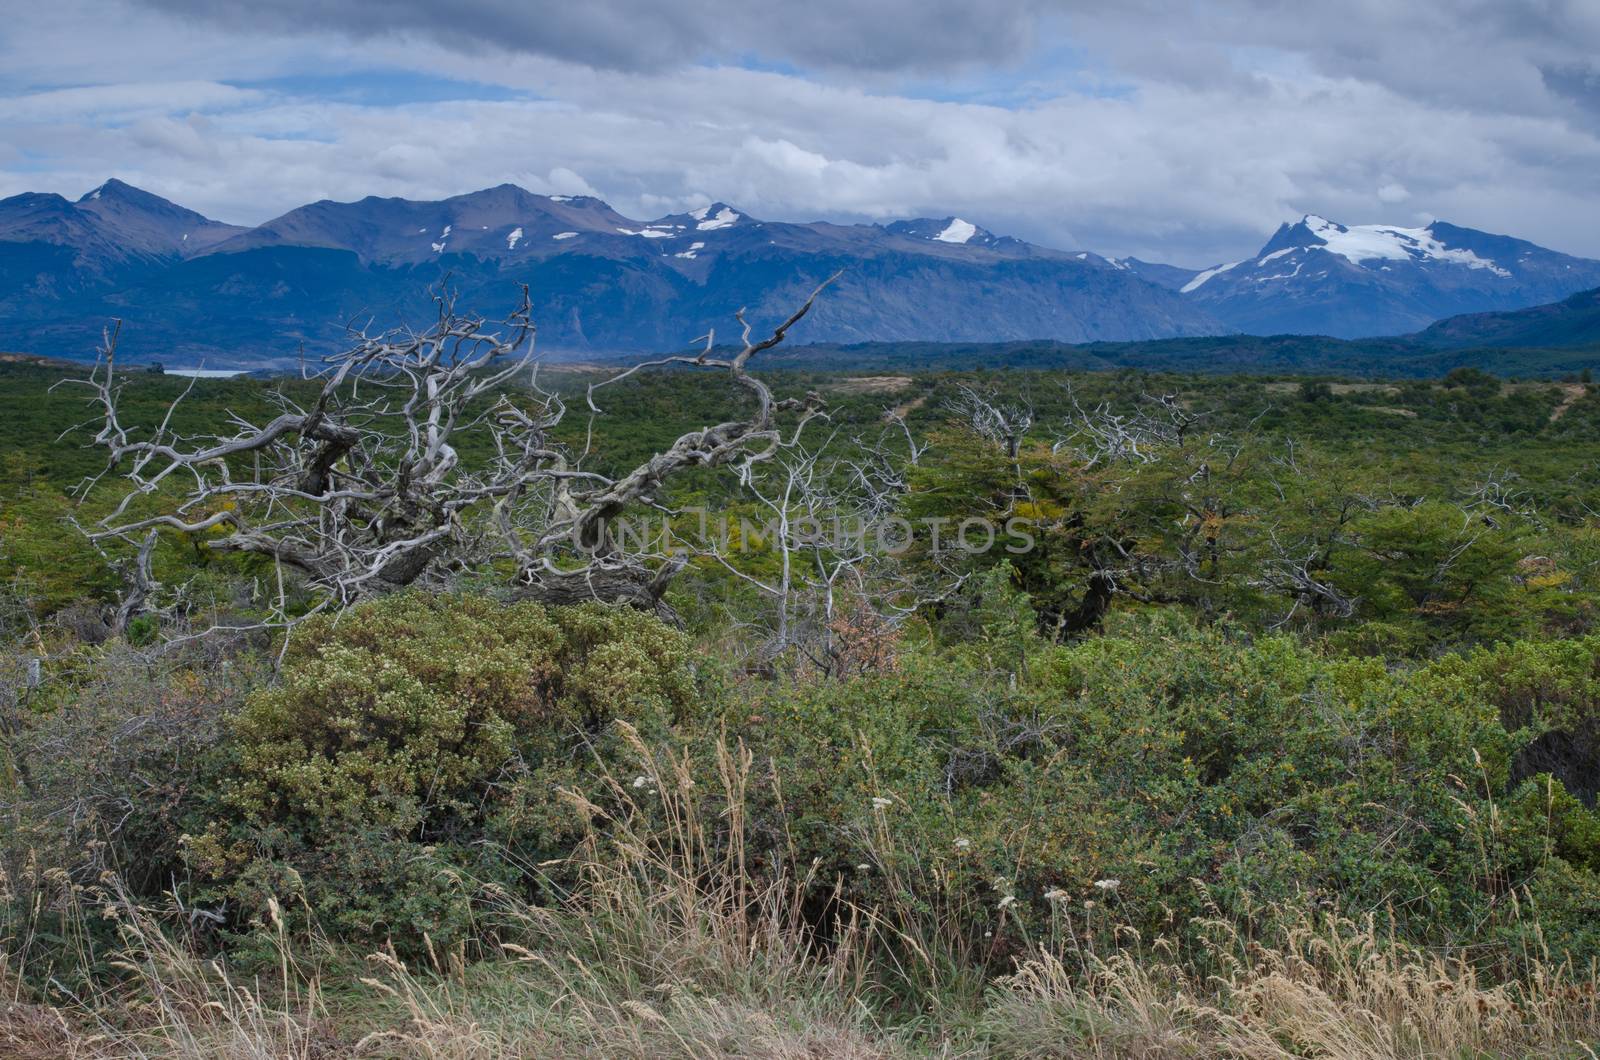 Scrubland and mountains in the Chilean Patagonia. by VictorSuarez